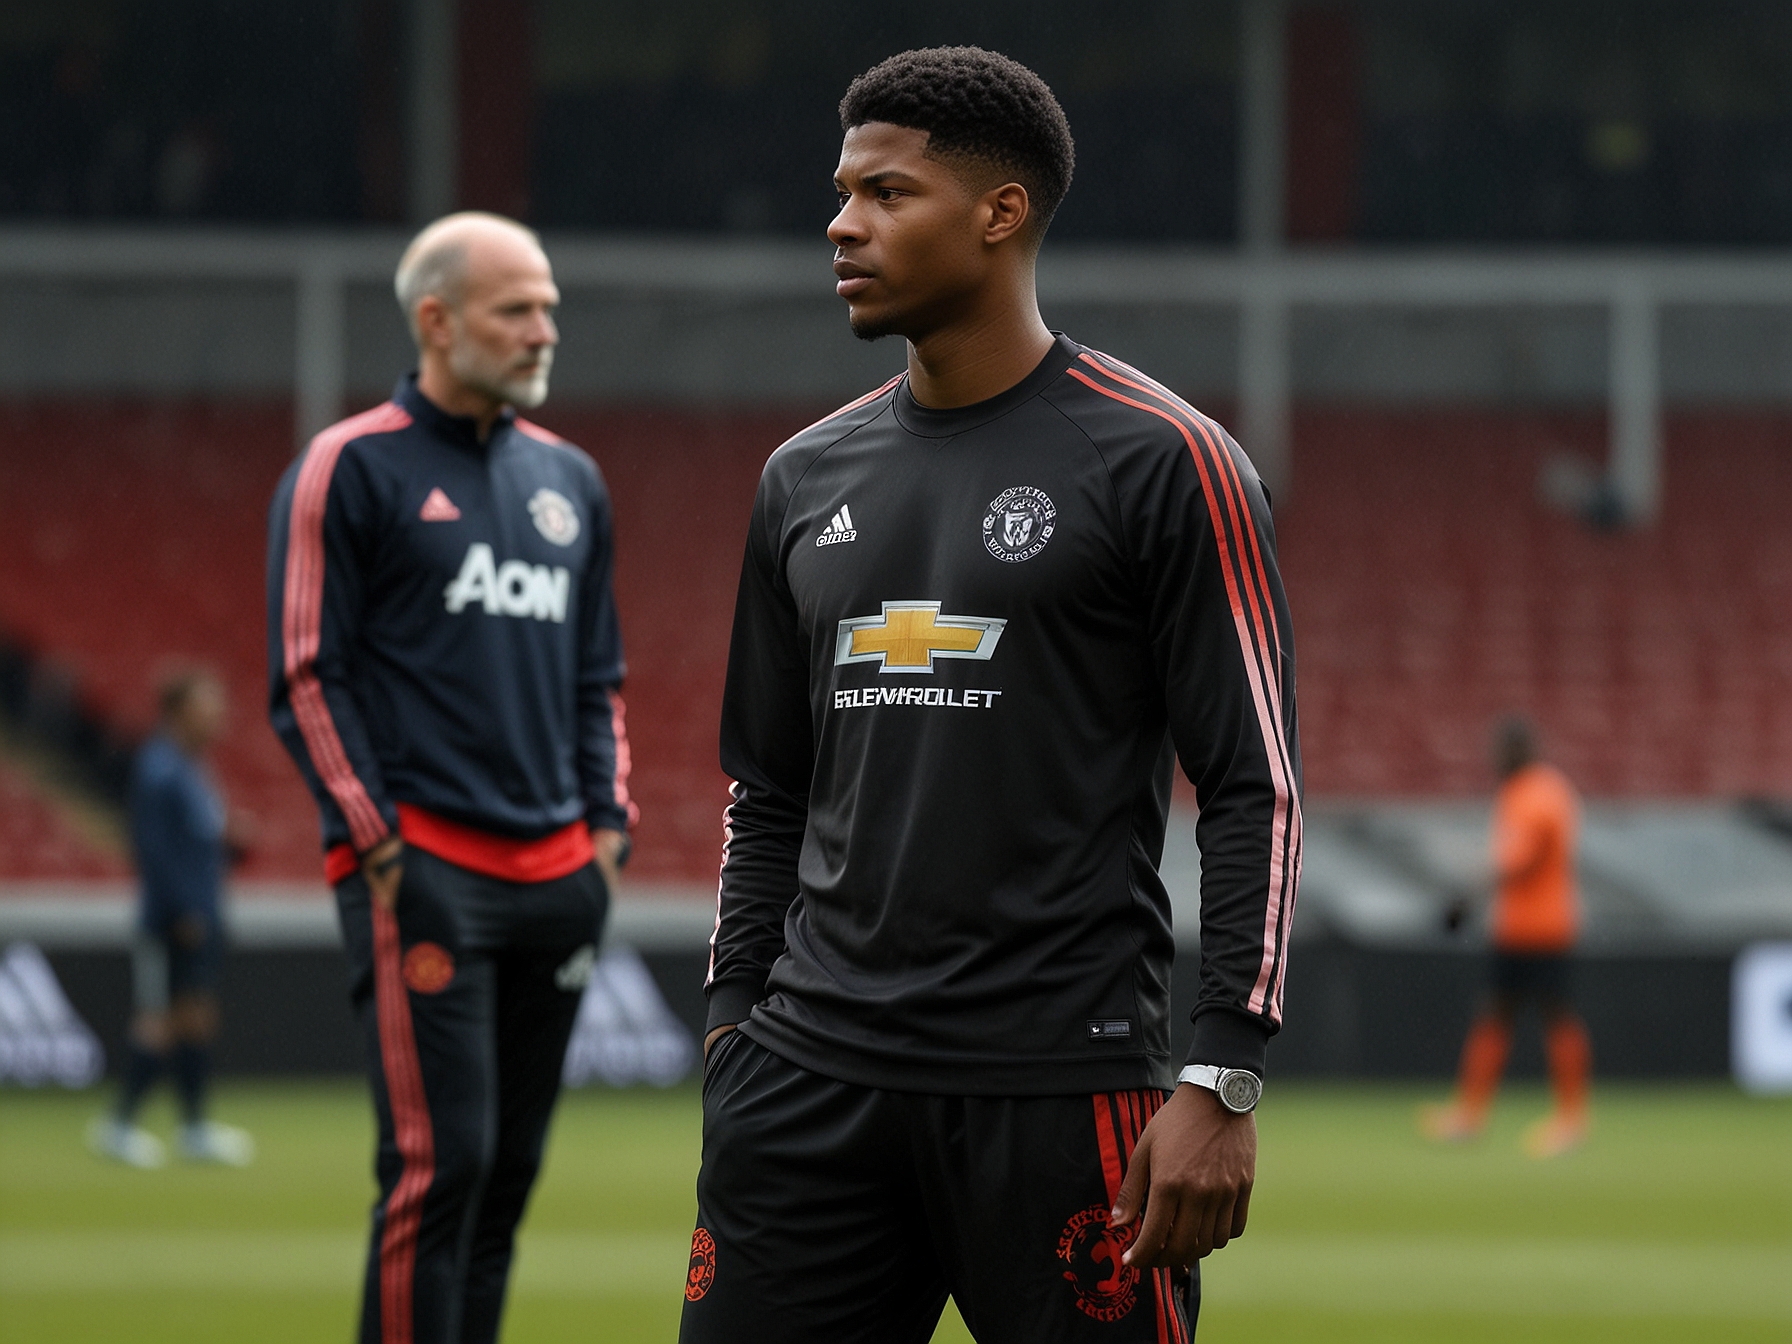 Erik ten Hag and Marcus Rashford in a deep conversation during a training session. This image signifies the pivotal discussions regarding Rashford's role and future at Manchester United under the new management.